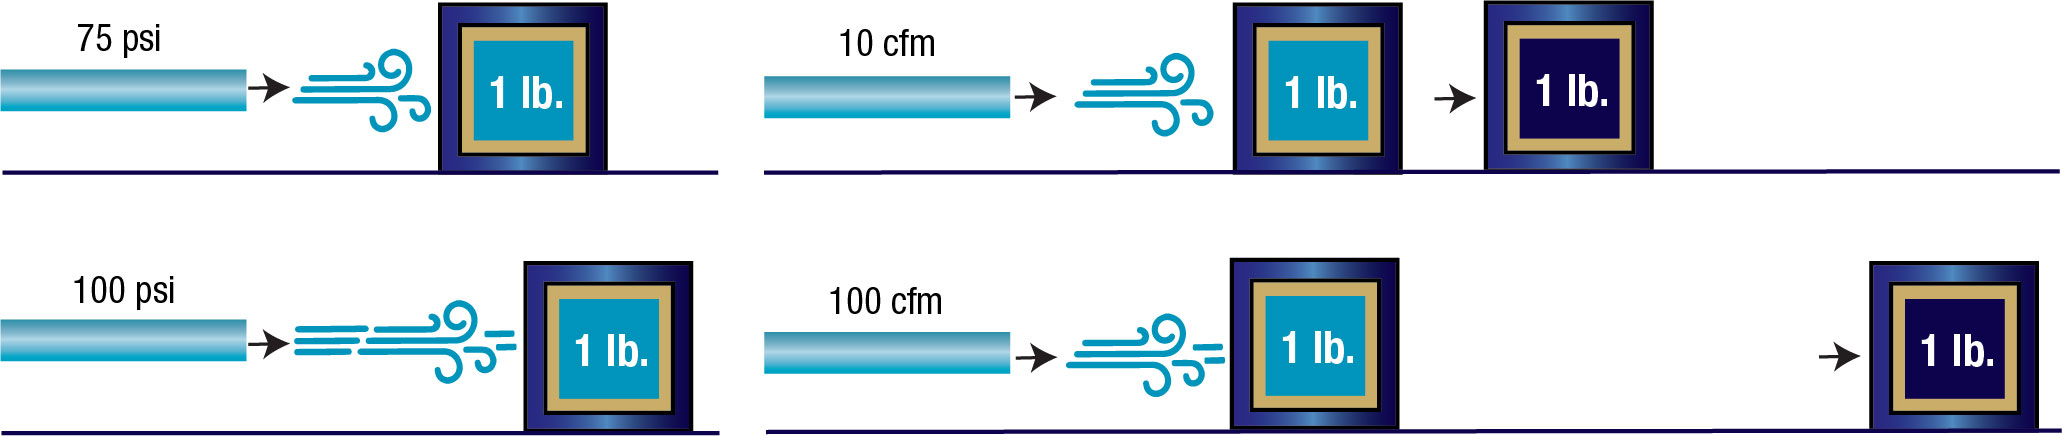 Figure 1 (left). Pressure is typically measured in psi. Figure 2 (right). Flow is typically measured in cubic feet per minute at a specific pressure. Photo credit: Atlas Copco.